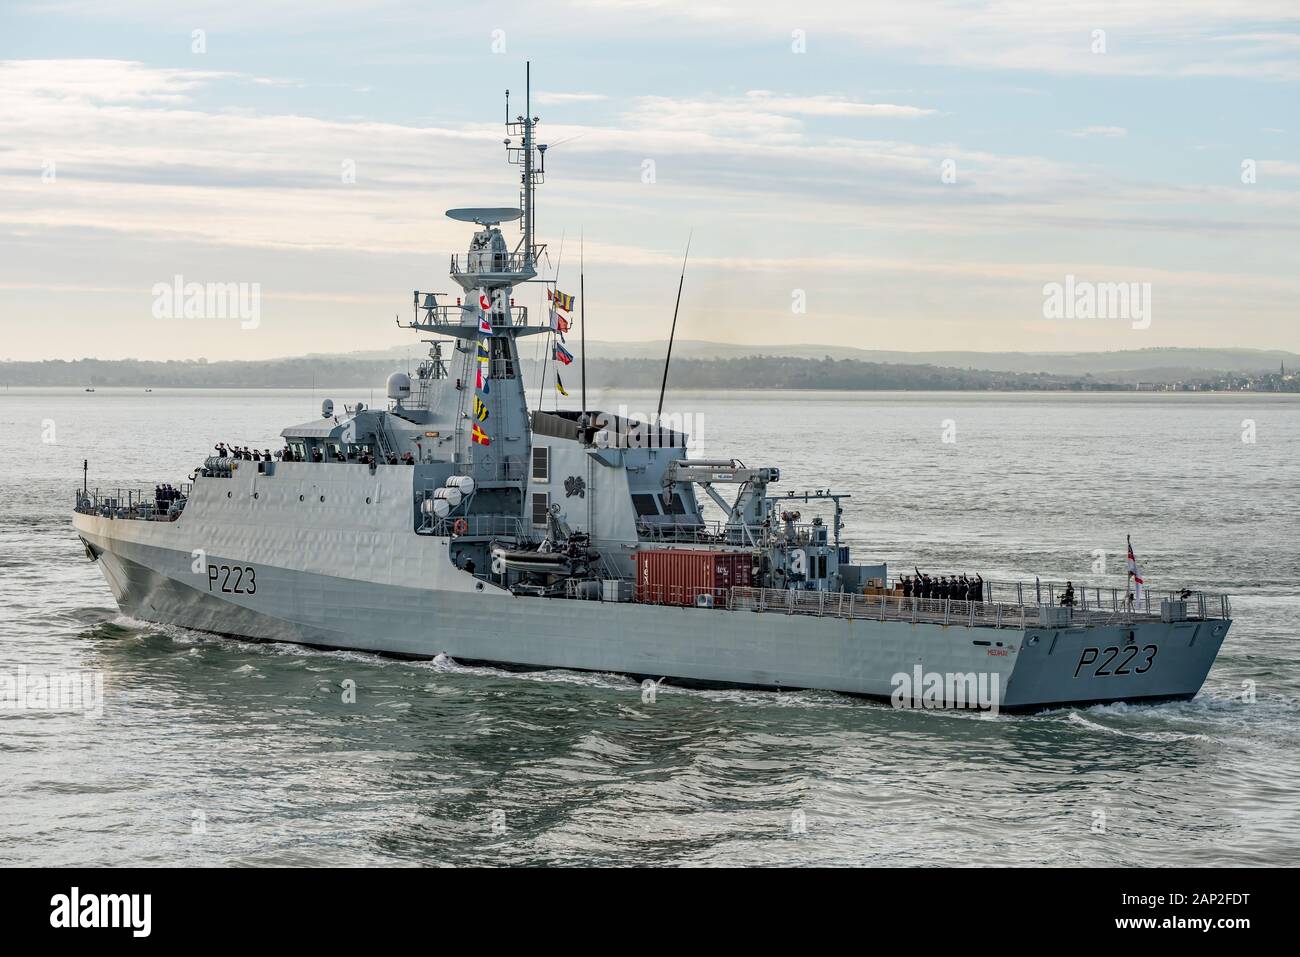 The Royal Navy Batch Ii River Class Offshore Patrol Vessel Hms Medway P223 Acknowledges Waving Family And Friends On The Round Tower As It Leaves Portsmouth Uk On The th January